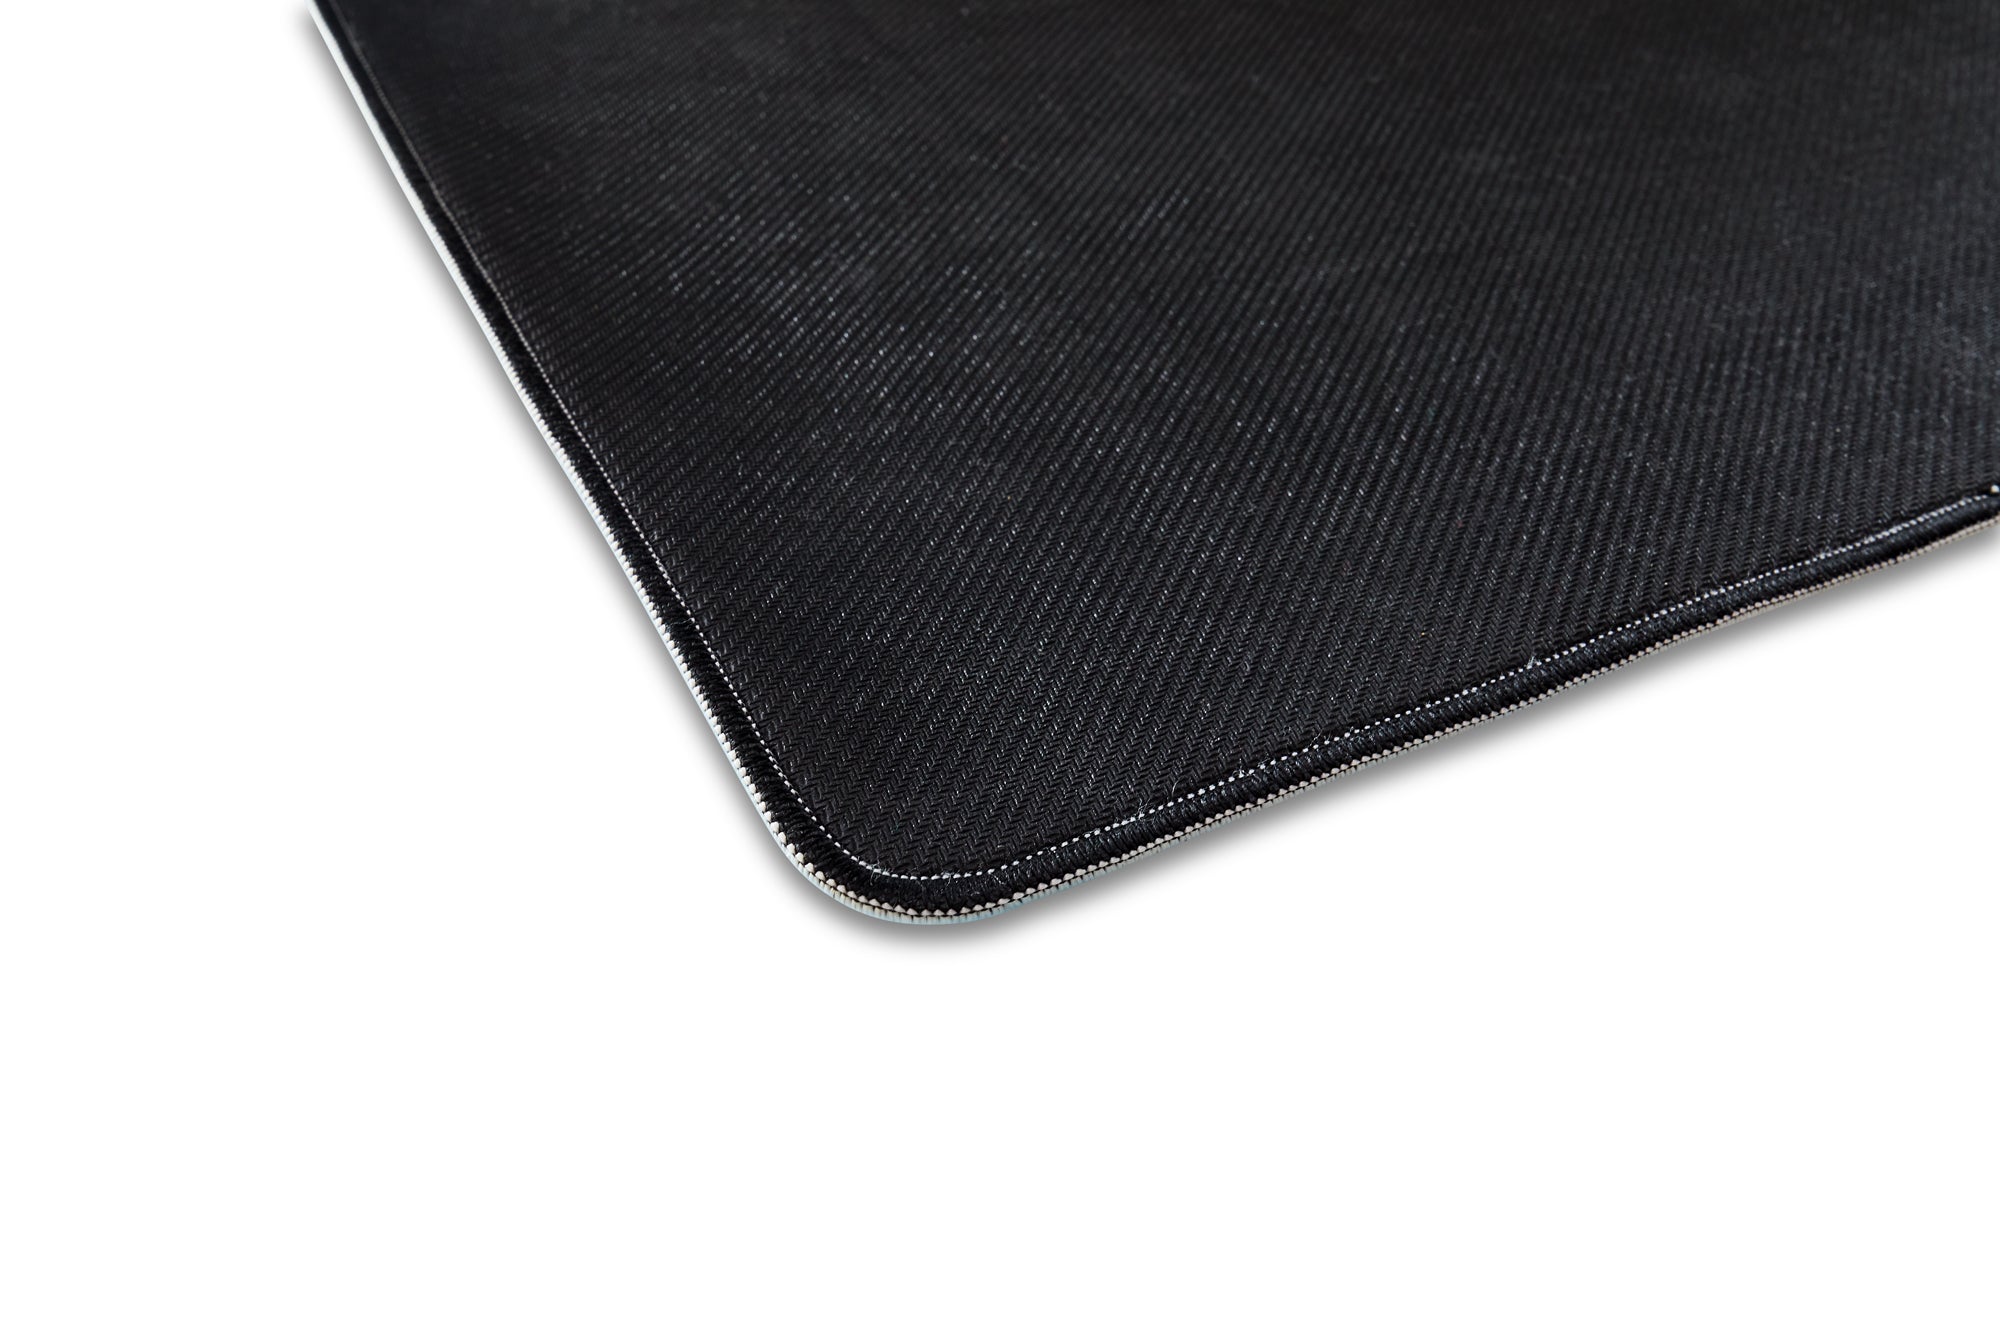 Glacier Frosted Mousepad-